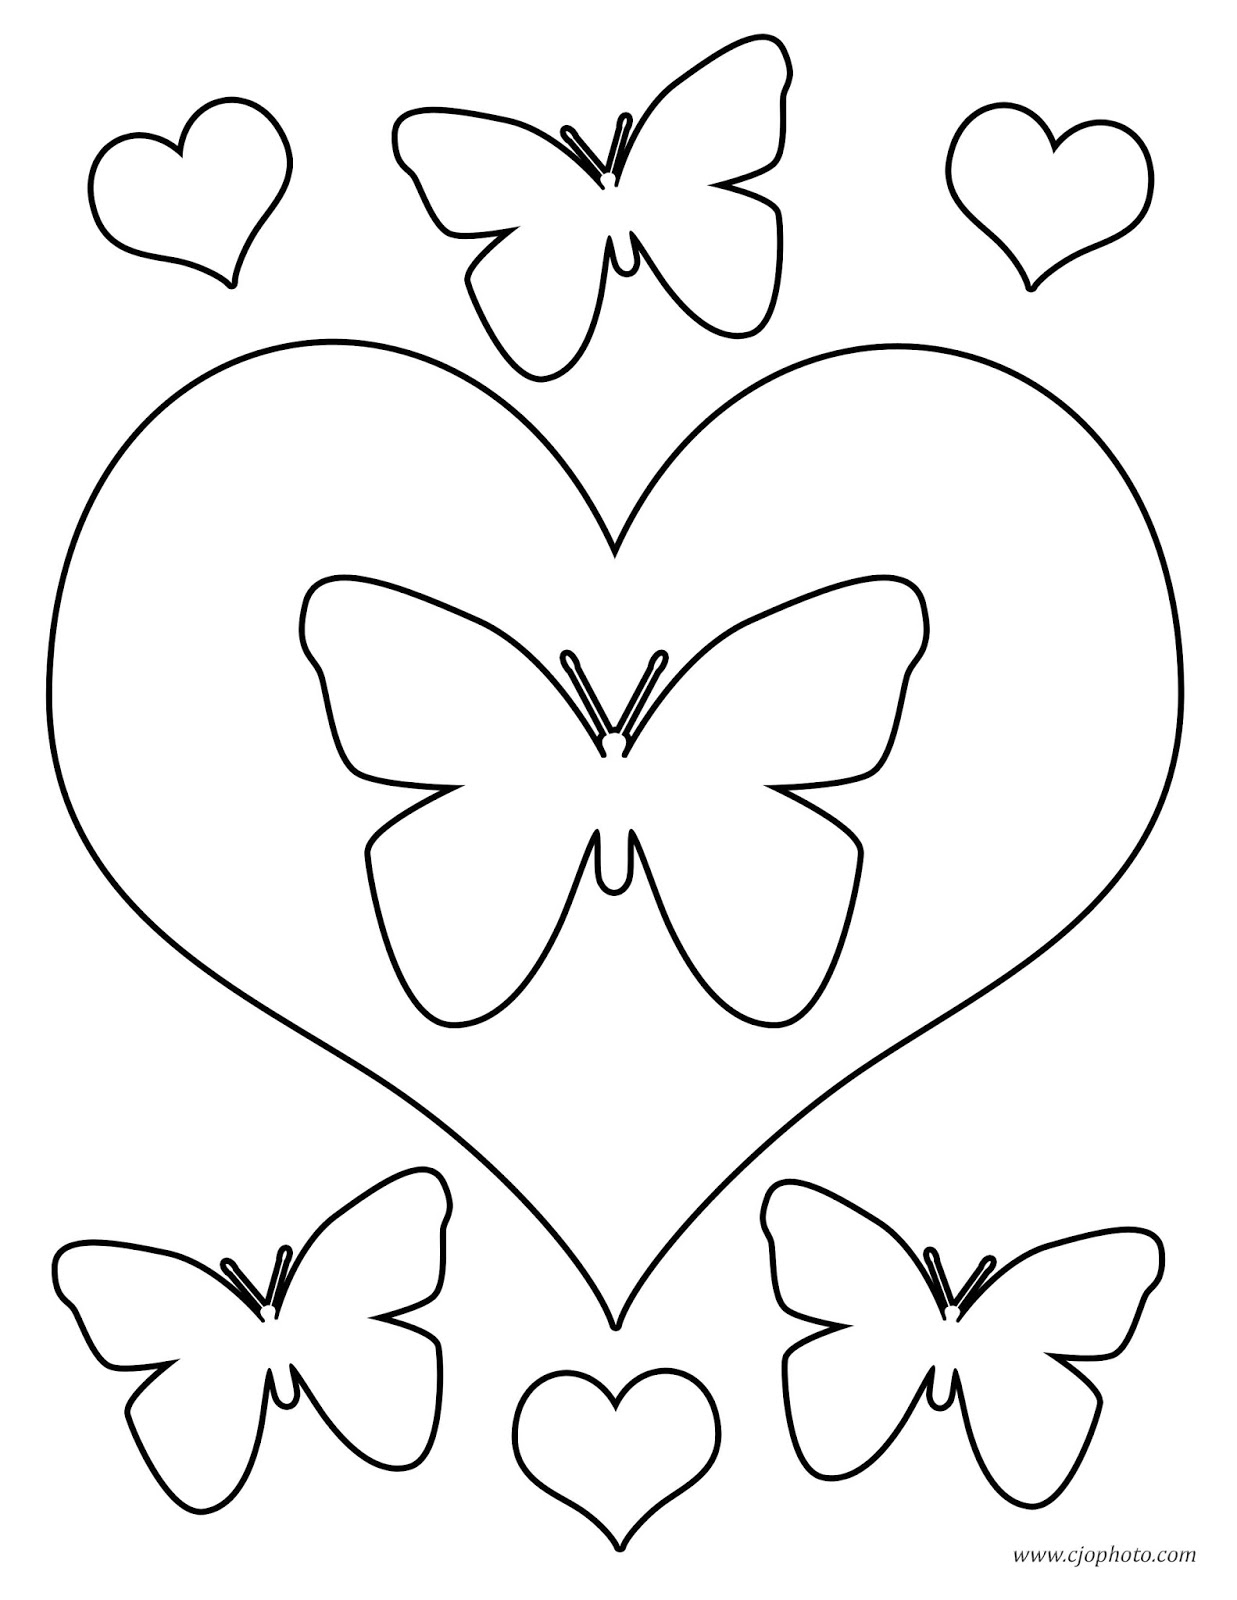 Snubberx: Heart And Butterfly Coloring